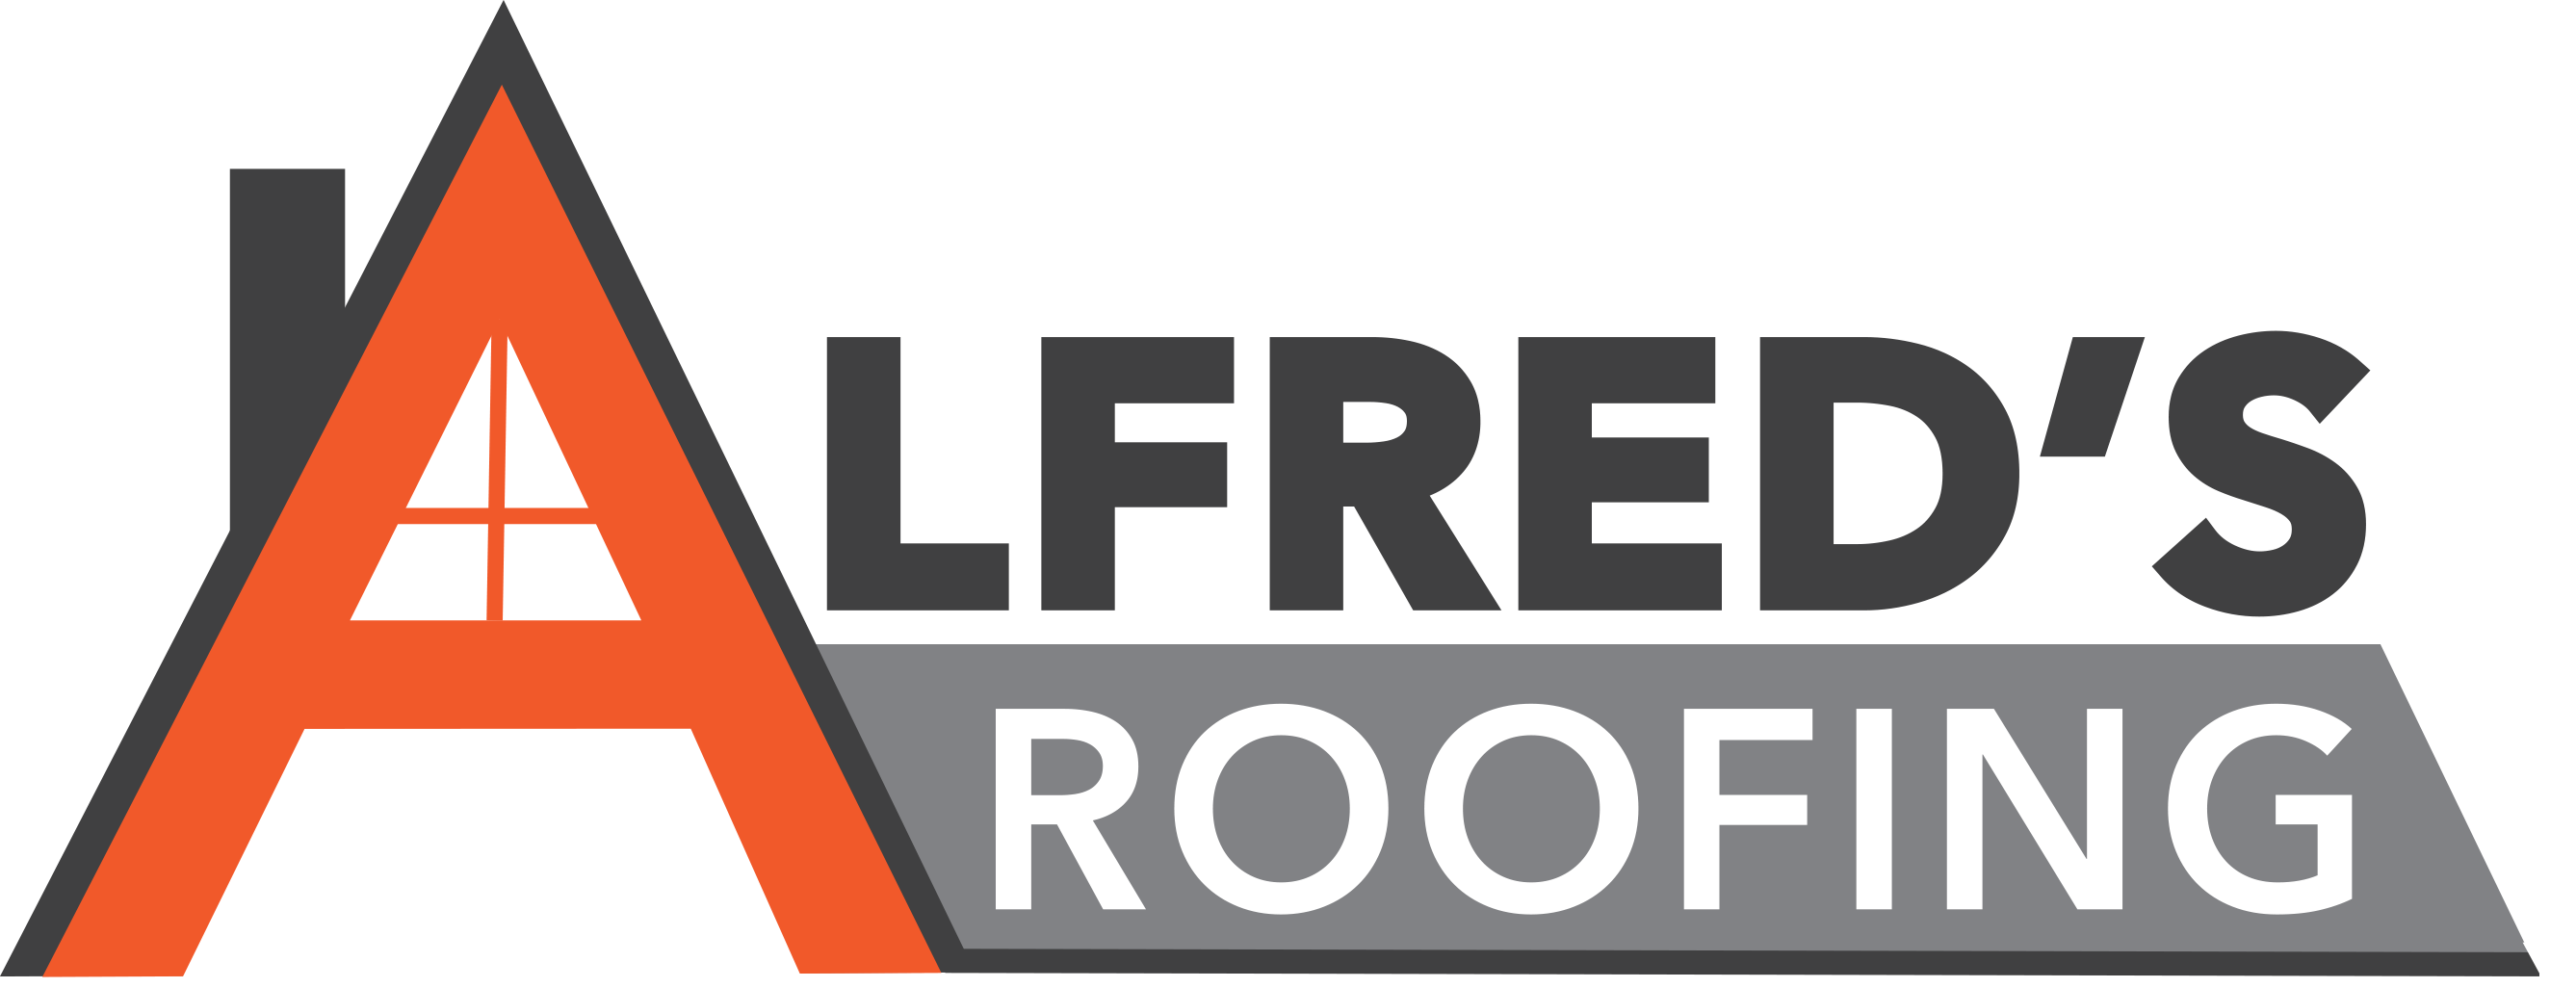 Alfreds roofing